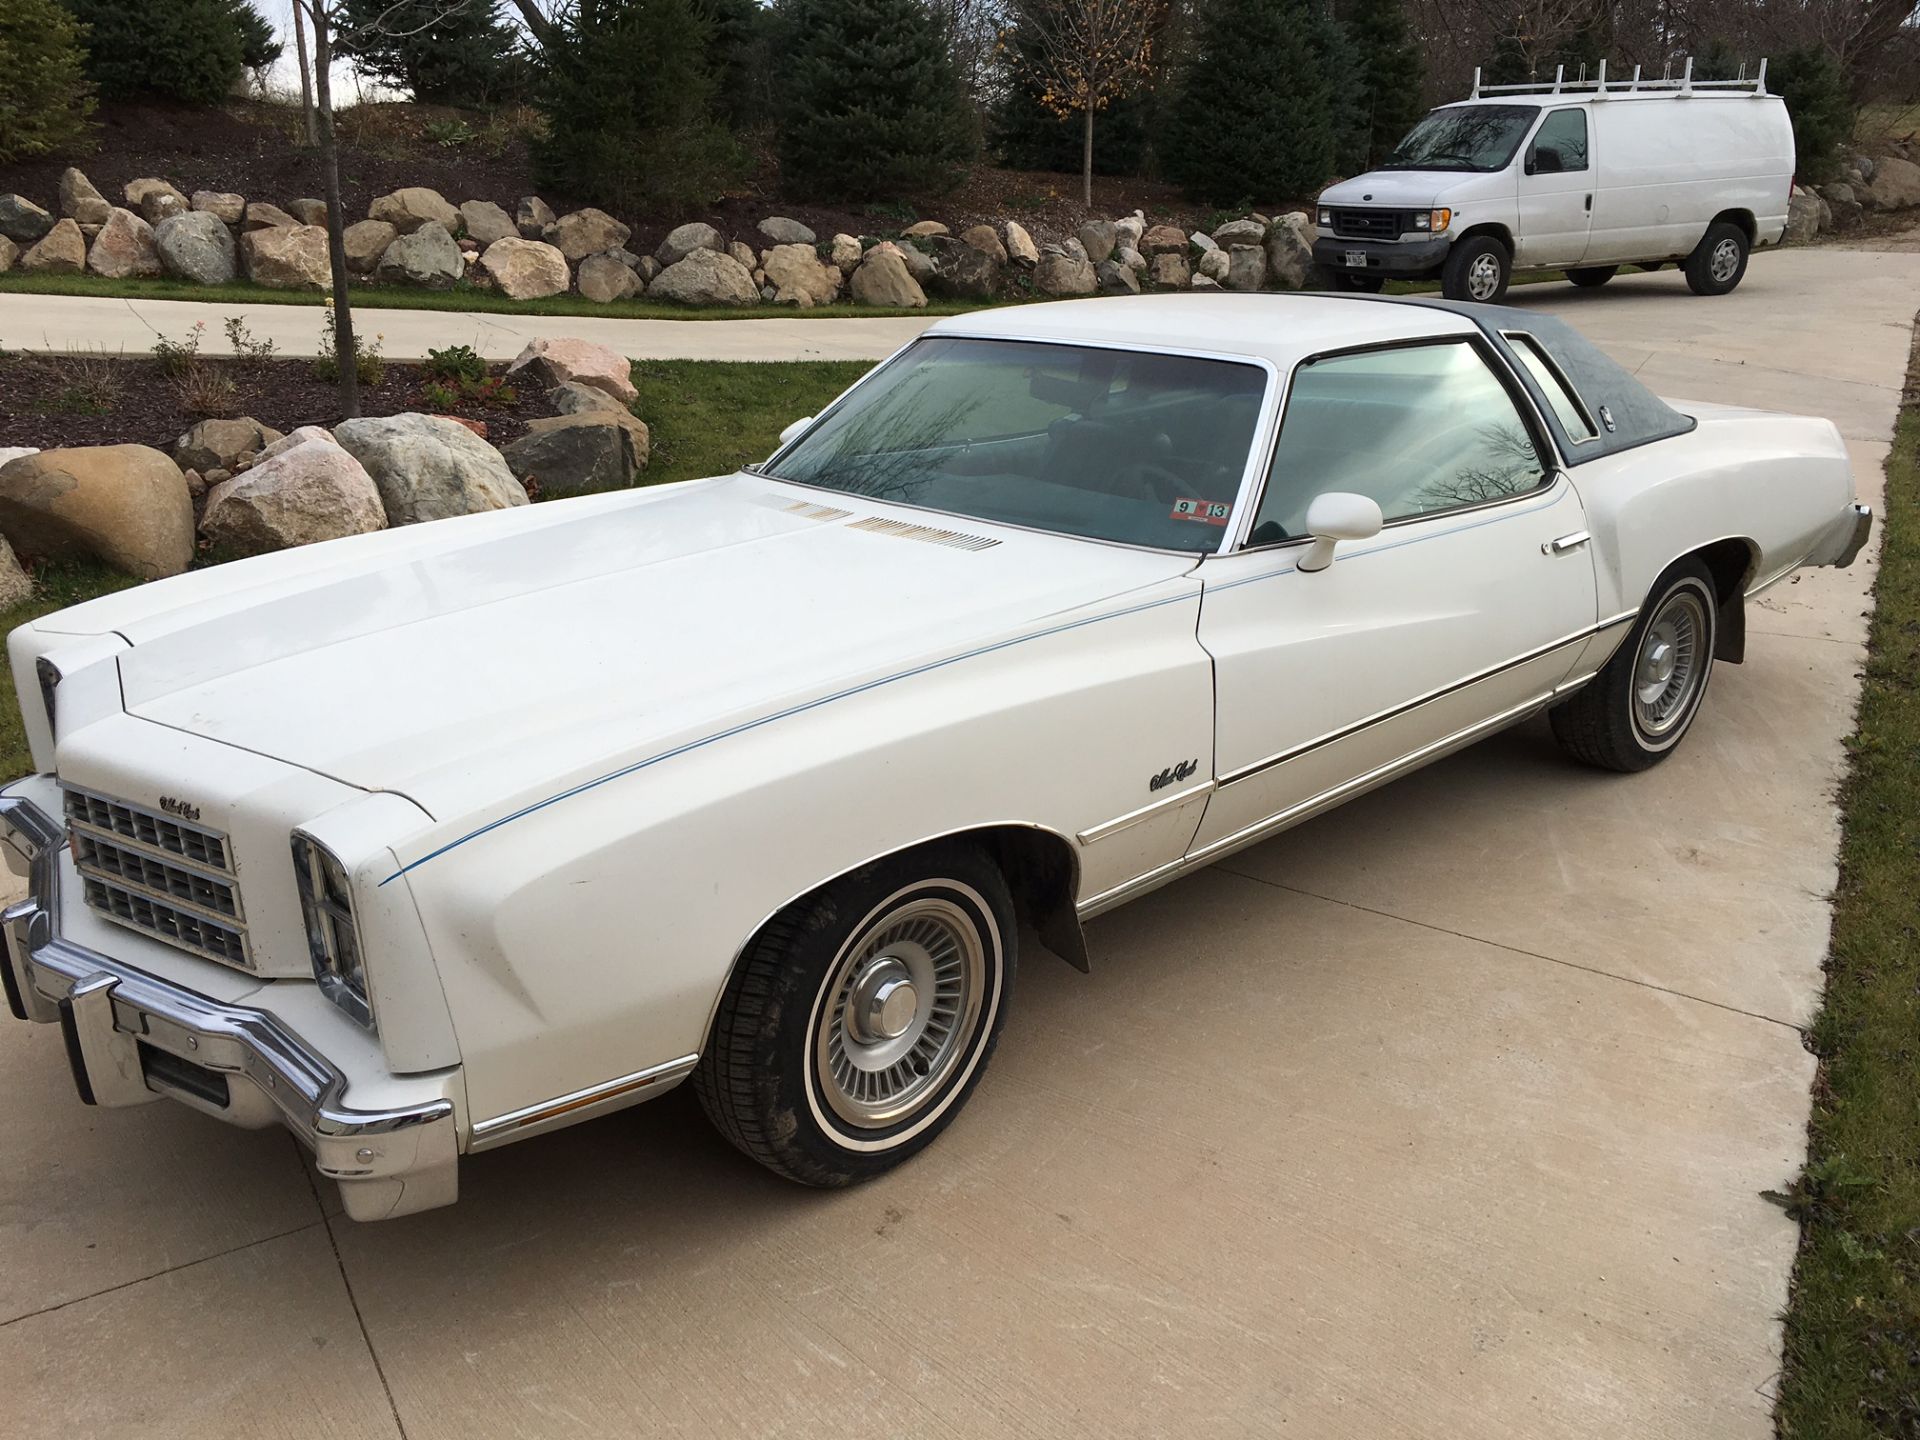 CHEVROLET MONTE CARLO; ONE OWNER; 75000 MILES, ALL ORIGINAL